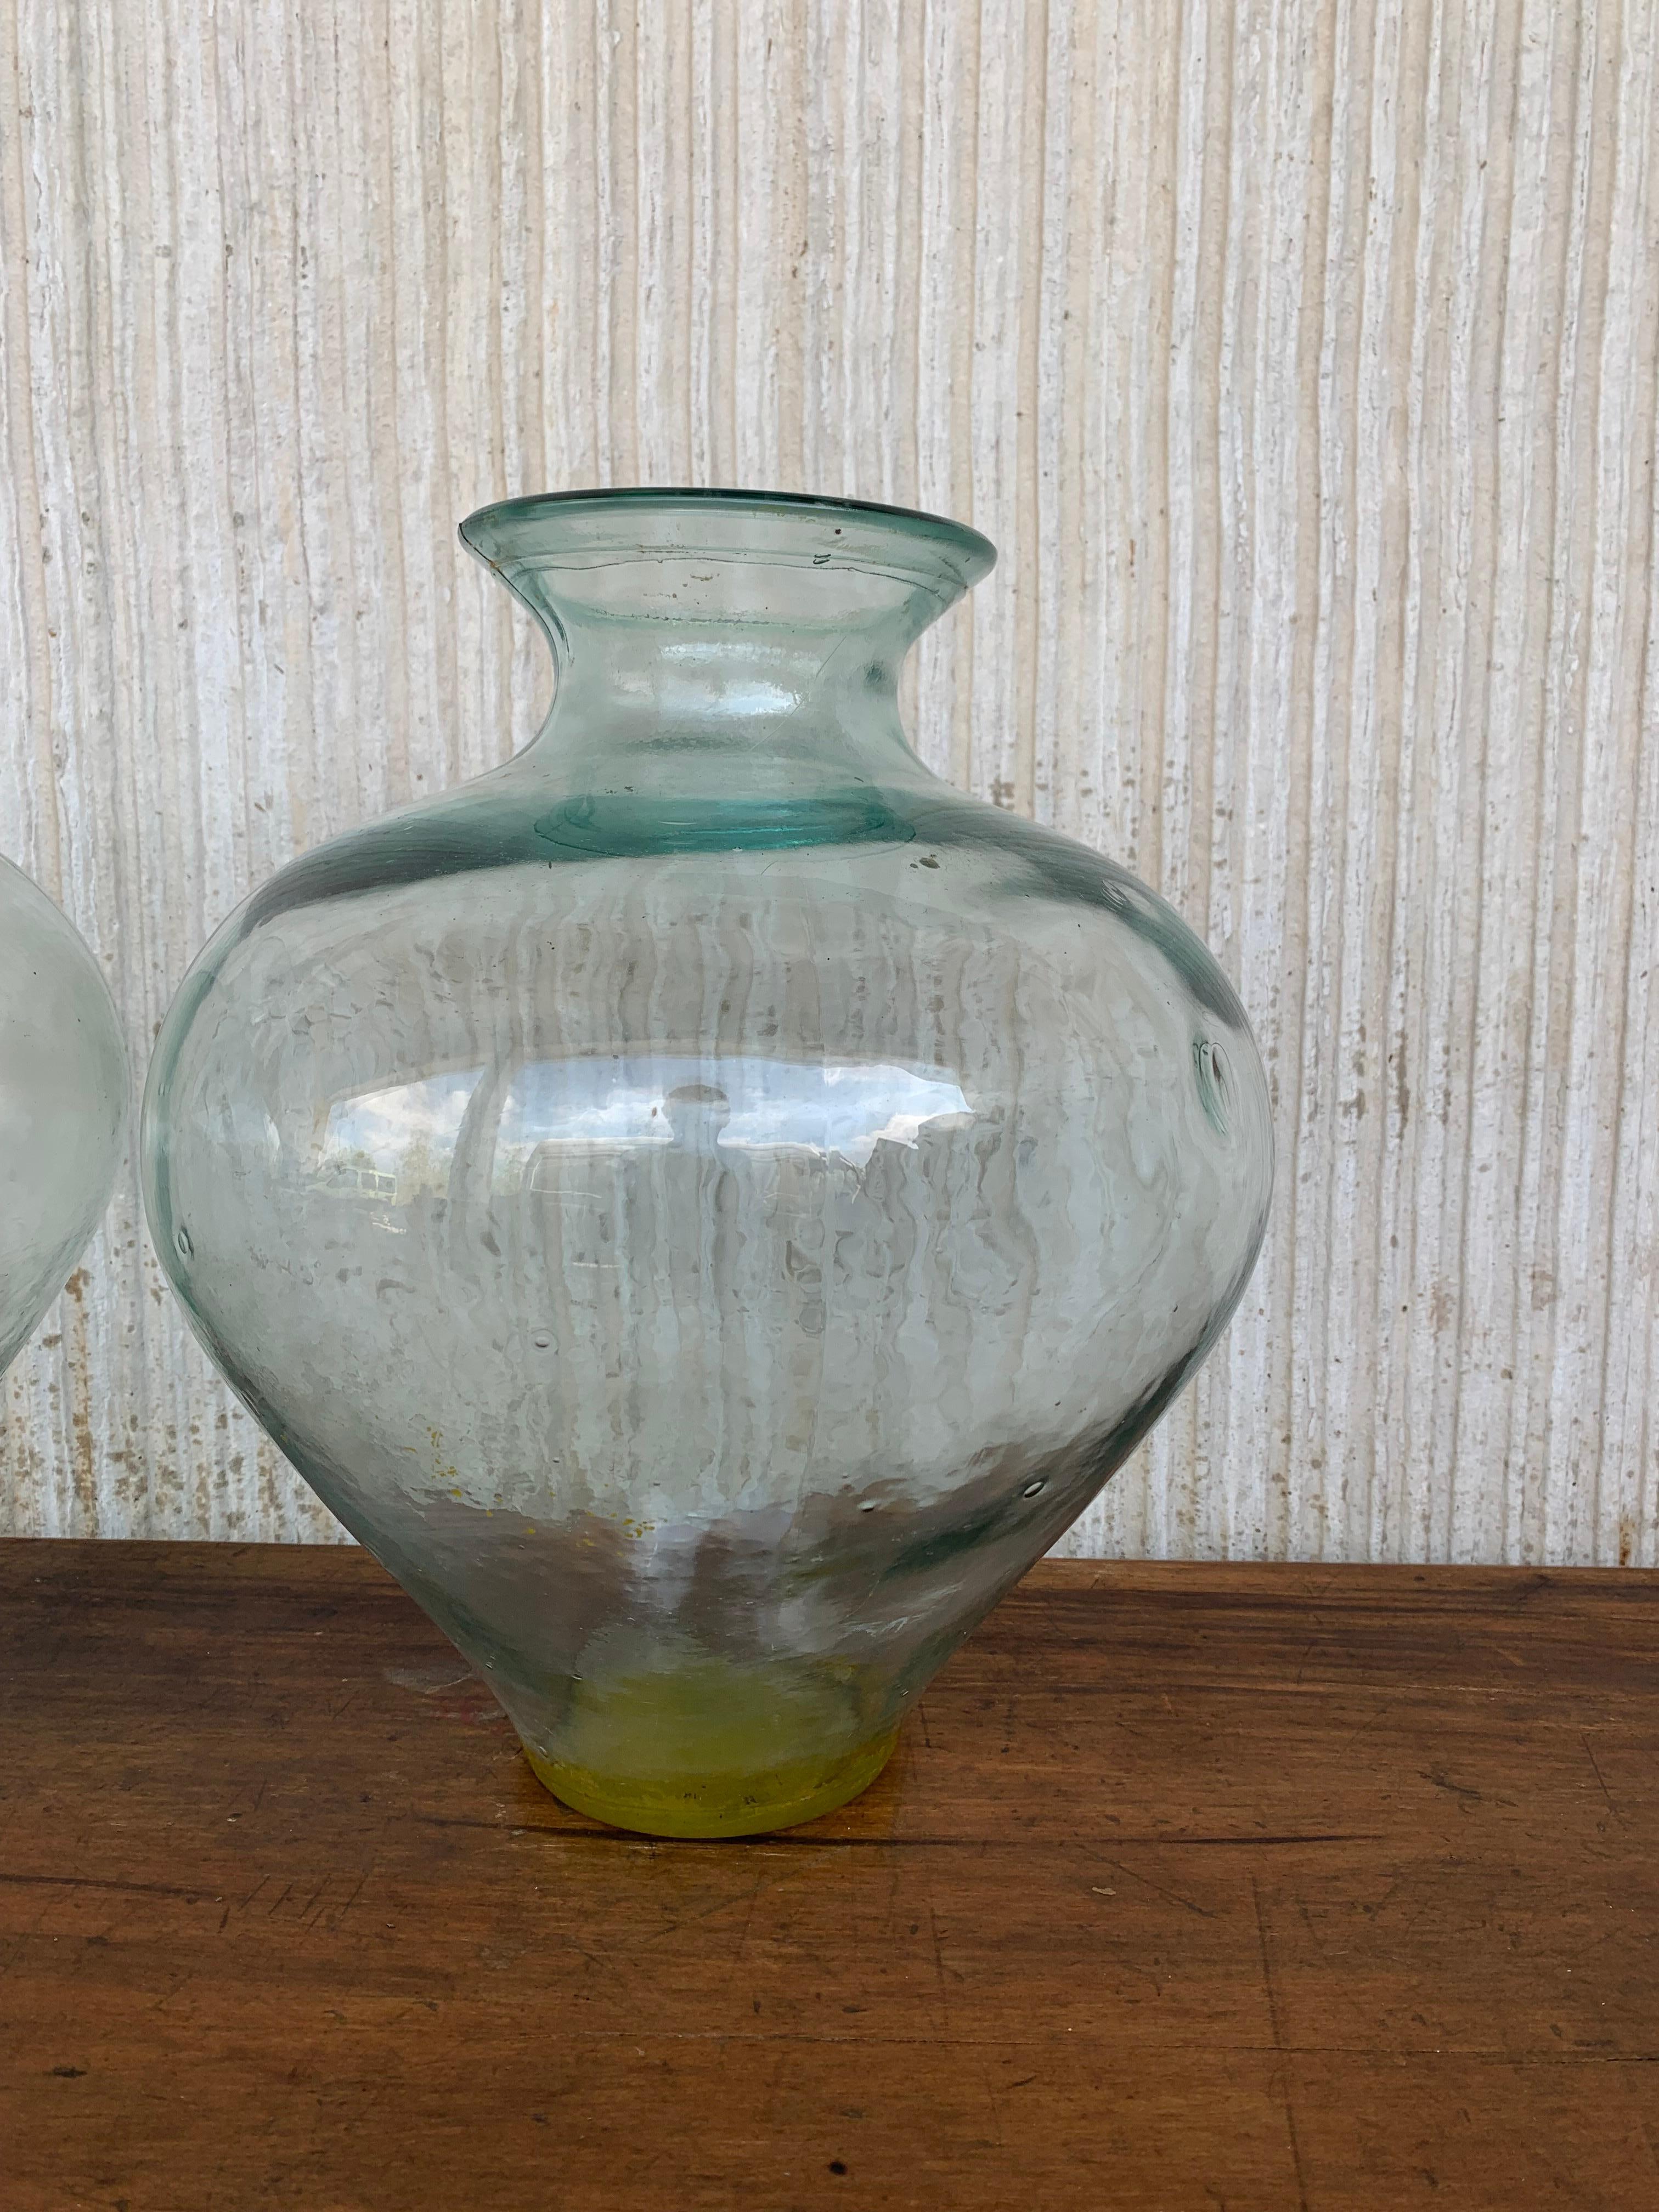 Set of 2 Green Glass French Demijohn Bottles with Woven Esparto Basket For Sale 6